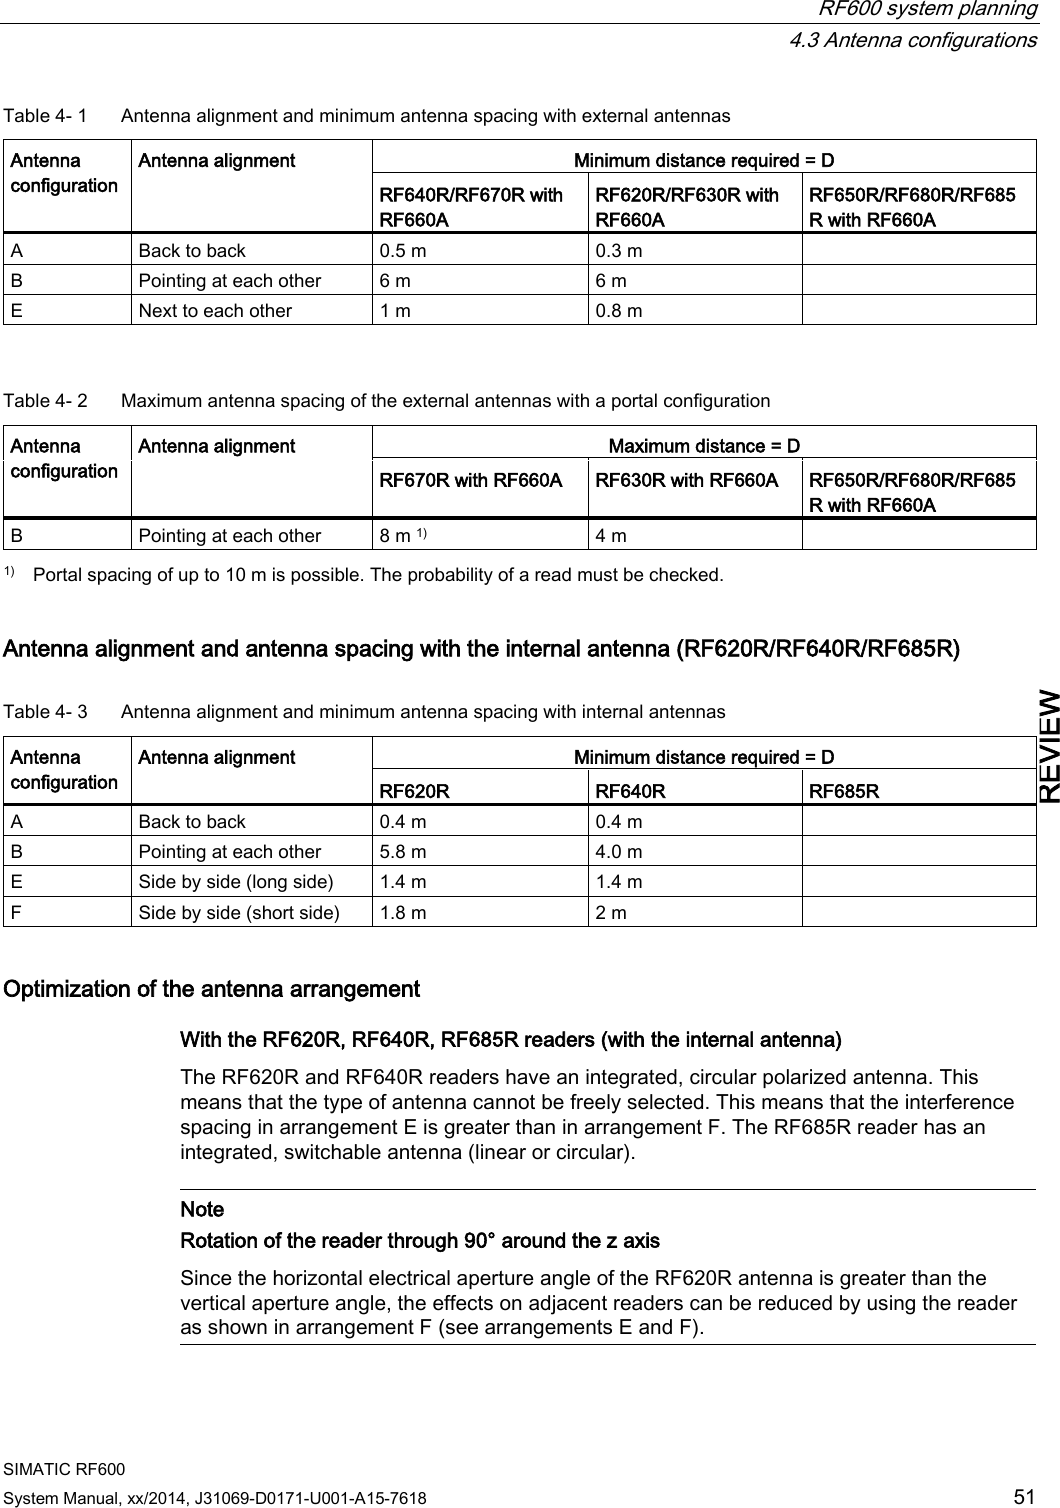  RF600 system planning  4.3 Antenna configurations SIMATIC RF600 System Manual, xx/2014, J31069-D0171-U001-A15-7618 51 REVIEW Table 4- 1  Antenna alignment and minimum antenna spacing with external antennas Antenna configuration Antenna alignment Minimum distance required = D RF640R/RF670R with RF660A RF620R/RF630R with RF660A RF650R/RF680R/RF685R with RF660A A Back to back 0.5 m 0.3 m  B Pointing at each other 6 m 6 m  E Next to each other 1 m 0.8 m   Table 4- 2  Maximum antenna spacing of the external antennas with a portal configuration Antenna configuration Antenna alignment Maximum distance = D RF670R with RF660A RF630R with RF660A RF650R/RF680R/RF685R with RF660A B Pointing at each other 8 m 1) 4 m   1) Portal spacing of up to 10 m is possible. The probability of a read must be checked. Antenna alignment and antenna spacing with the internal antenna (RF620R/RF640R/RF685R) Table 4- 3  Antenna alignment and minimum antenna spacing with internal antennas Antenna configuration Antenna alignment Minimum distance required = D RF620R RF640R RF685R A Back to back 0.4 m 0.4 m  B Pointing at each other 5.8 m 4.0 m  E Side by side (long side) 1.4 m 1.4 m  F Side by side (short side) 1.8 m 2 m  Optimization of the antenna arrangement With the RF620R, RF640R, RF685R readers (with the internal antenna) The RF620R and RF640R readers have an integrated, circular polarized antenna. This means that the type of antenna cannot be freely selected. This means that the interference spacing in arrangement E is greater than in arrangement F. The RF685R reader has an integrated, switchable antenna (linear or circular).   Note Rotation of the reader through 90° around the z axis Since the horizontal electrical aperture angle of the RF620R antenna is greater than the vertical aperture angle, the effects on adjacent readers can be reduced by using the reader as shown in arrangement F (see arrangements E and F).  